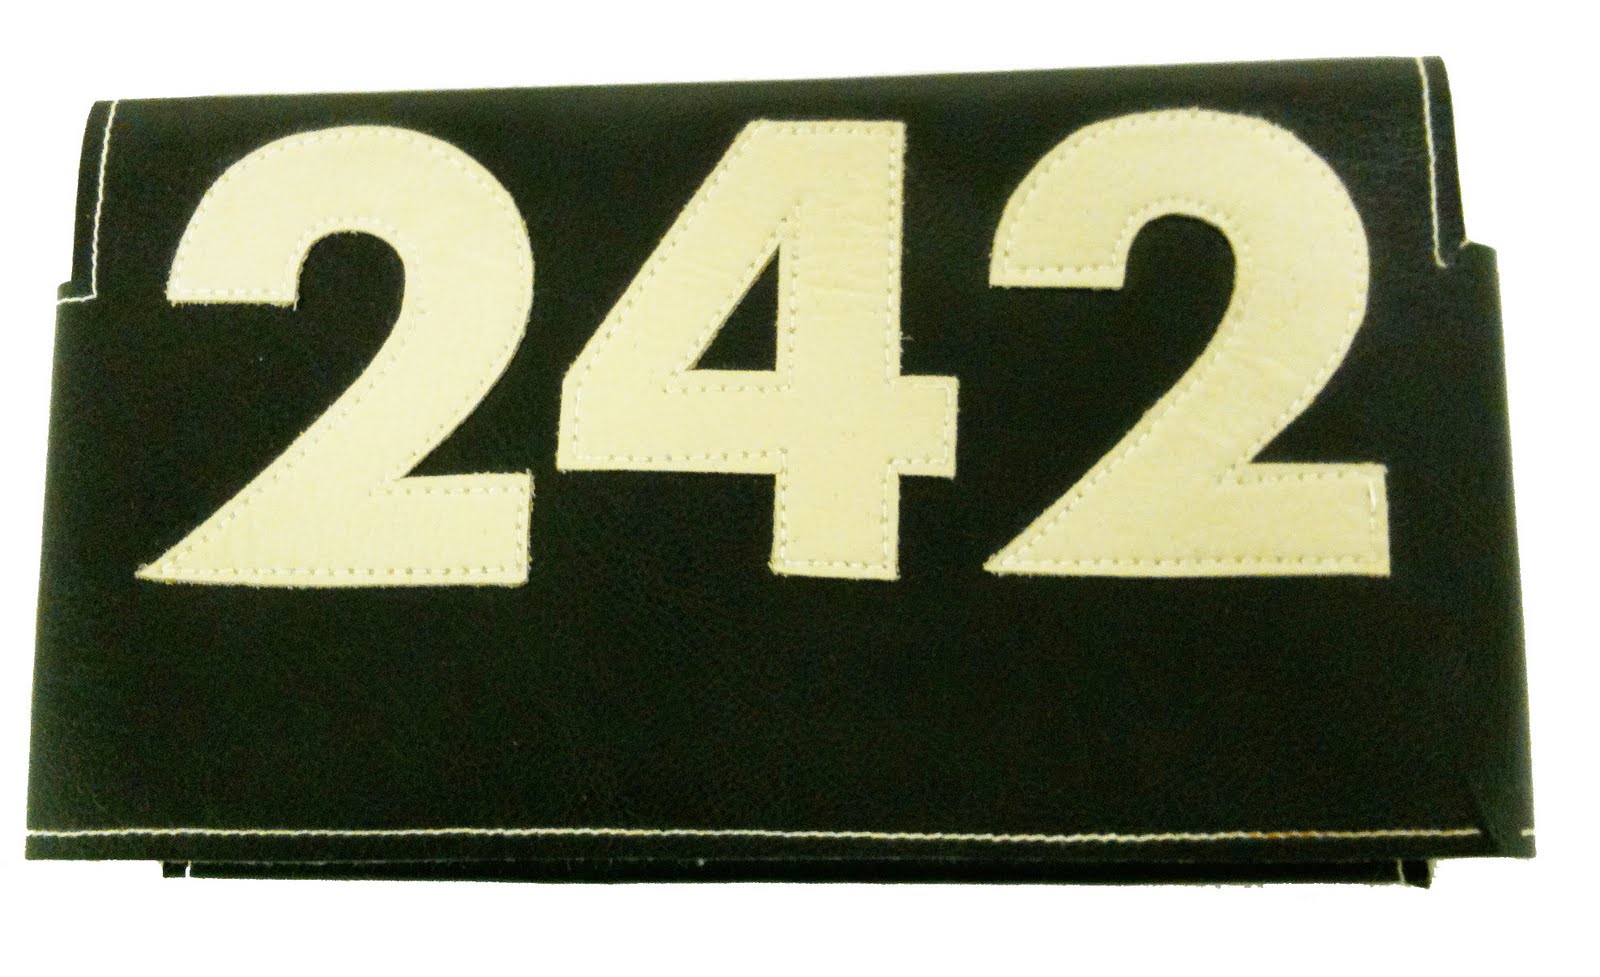 front-242-collector-memorabilia-of-the-week-242-armband